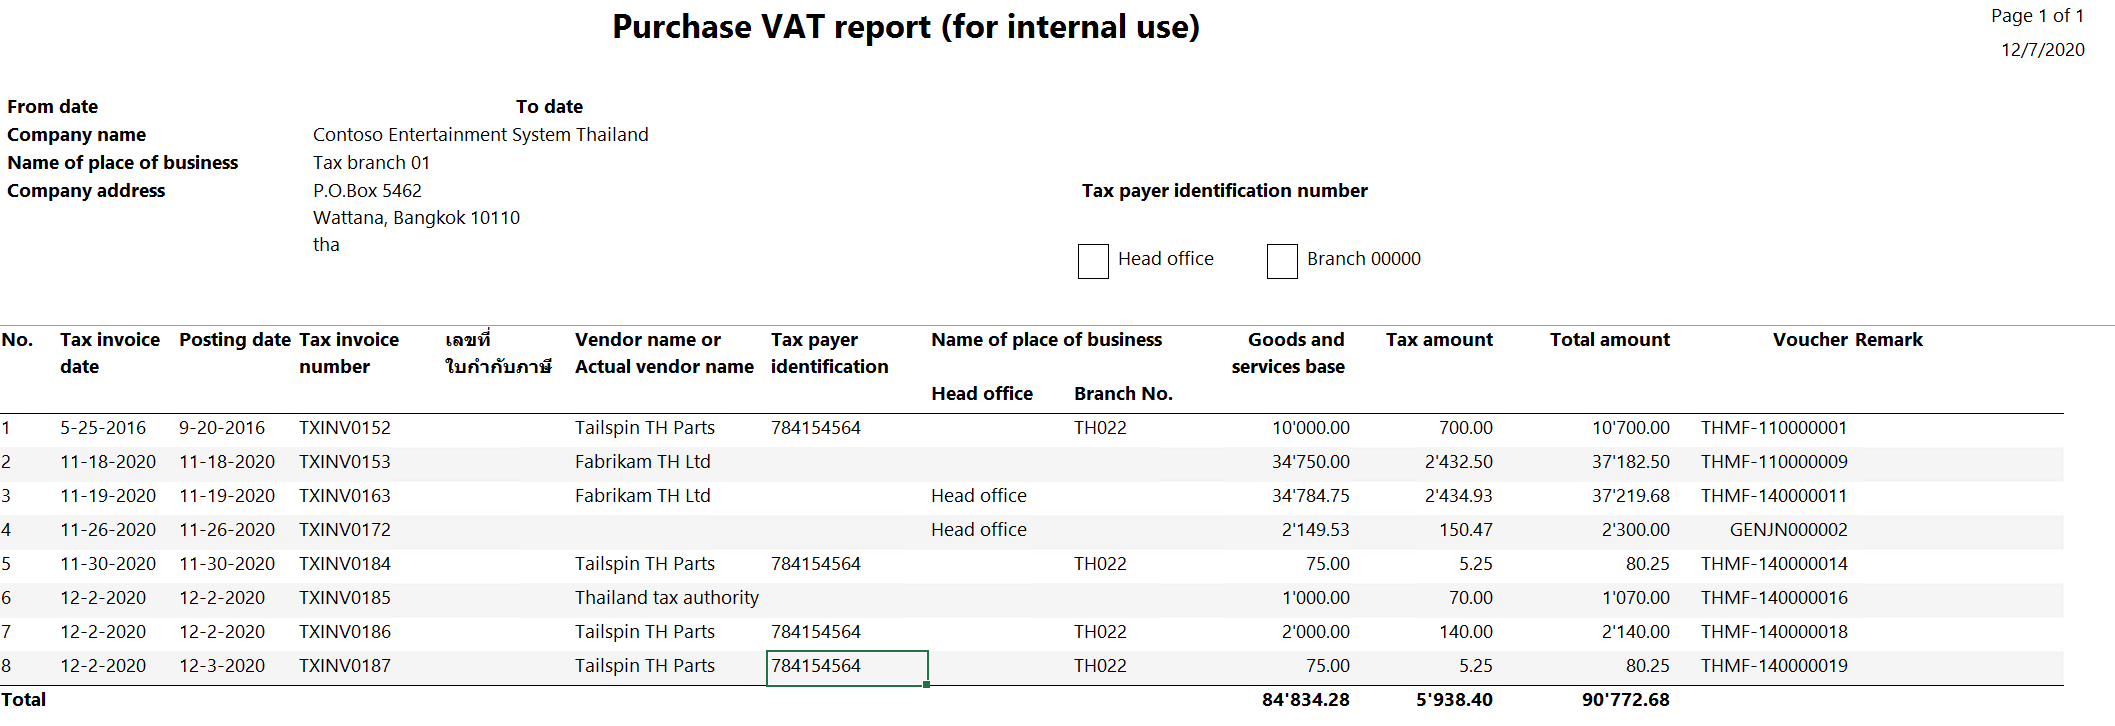 Purchase VAT report  for internal use .